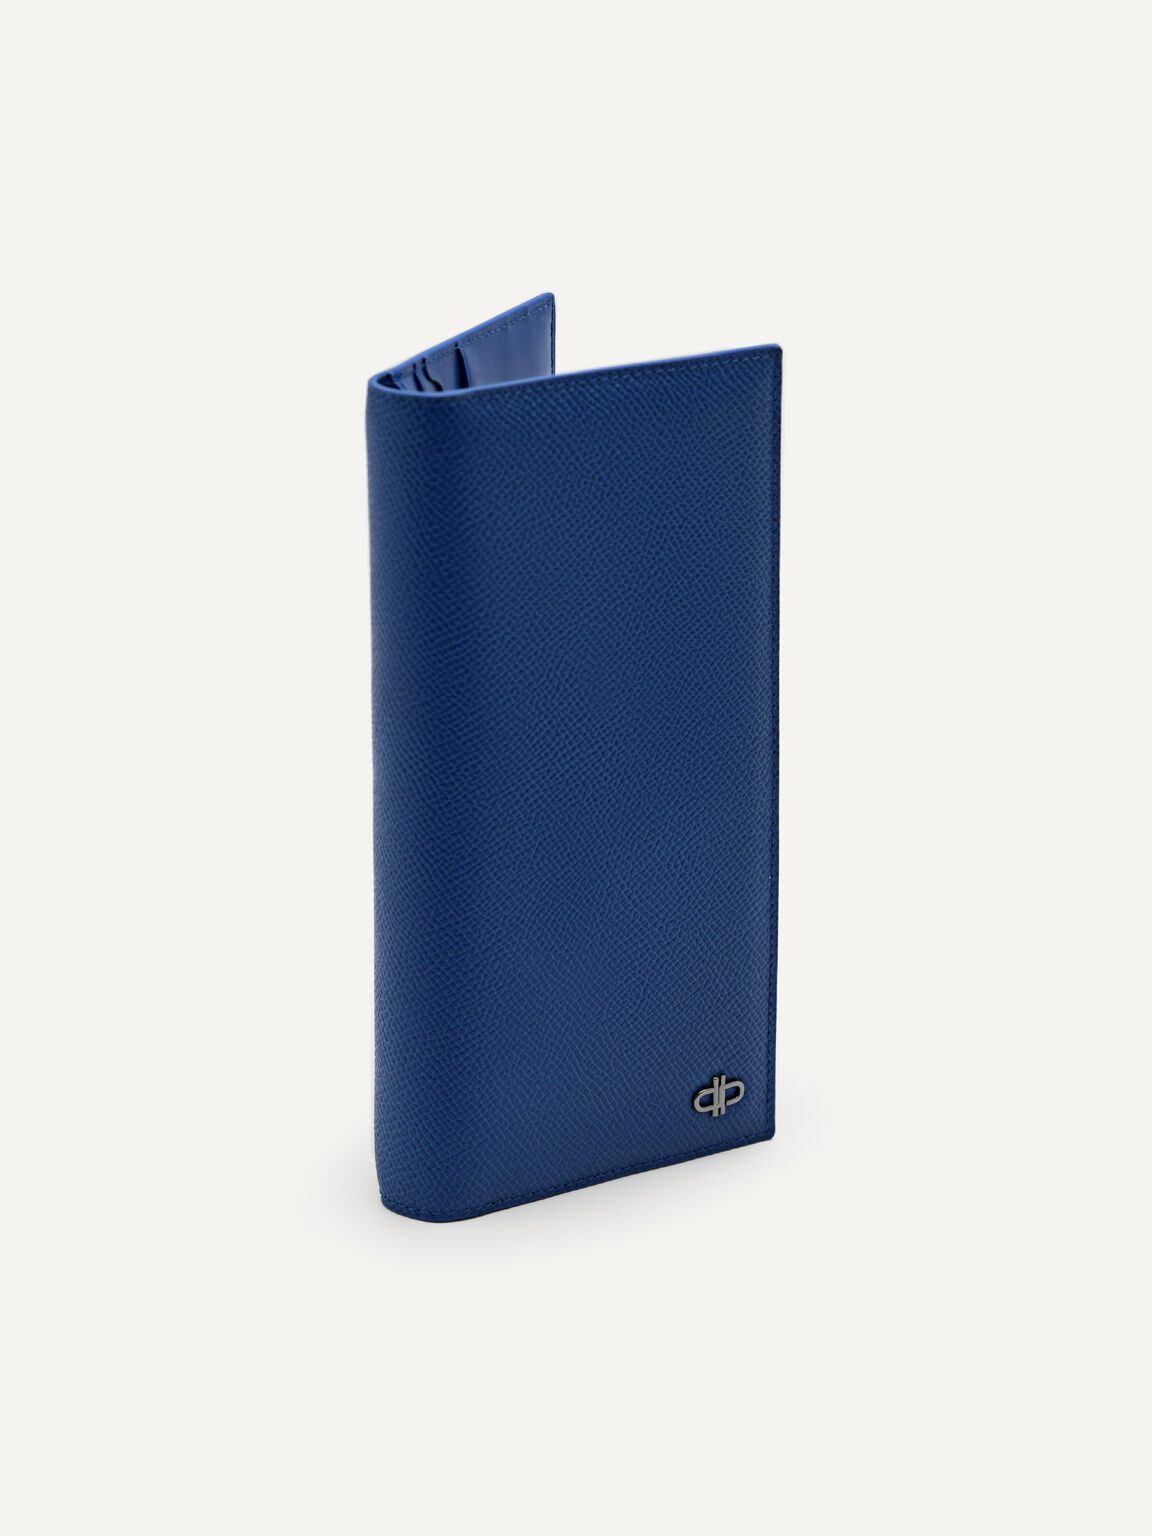 PEDRO Icon Leather Long Wallet, Navy